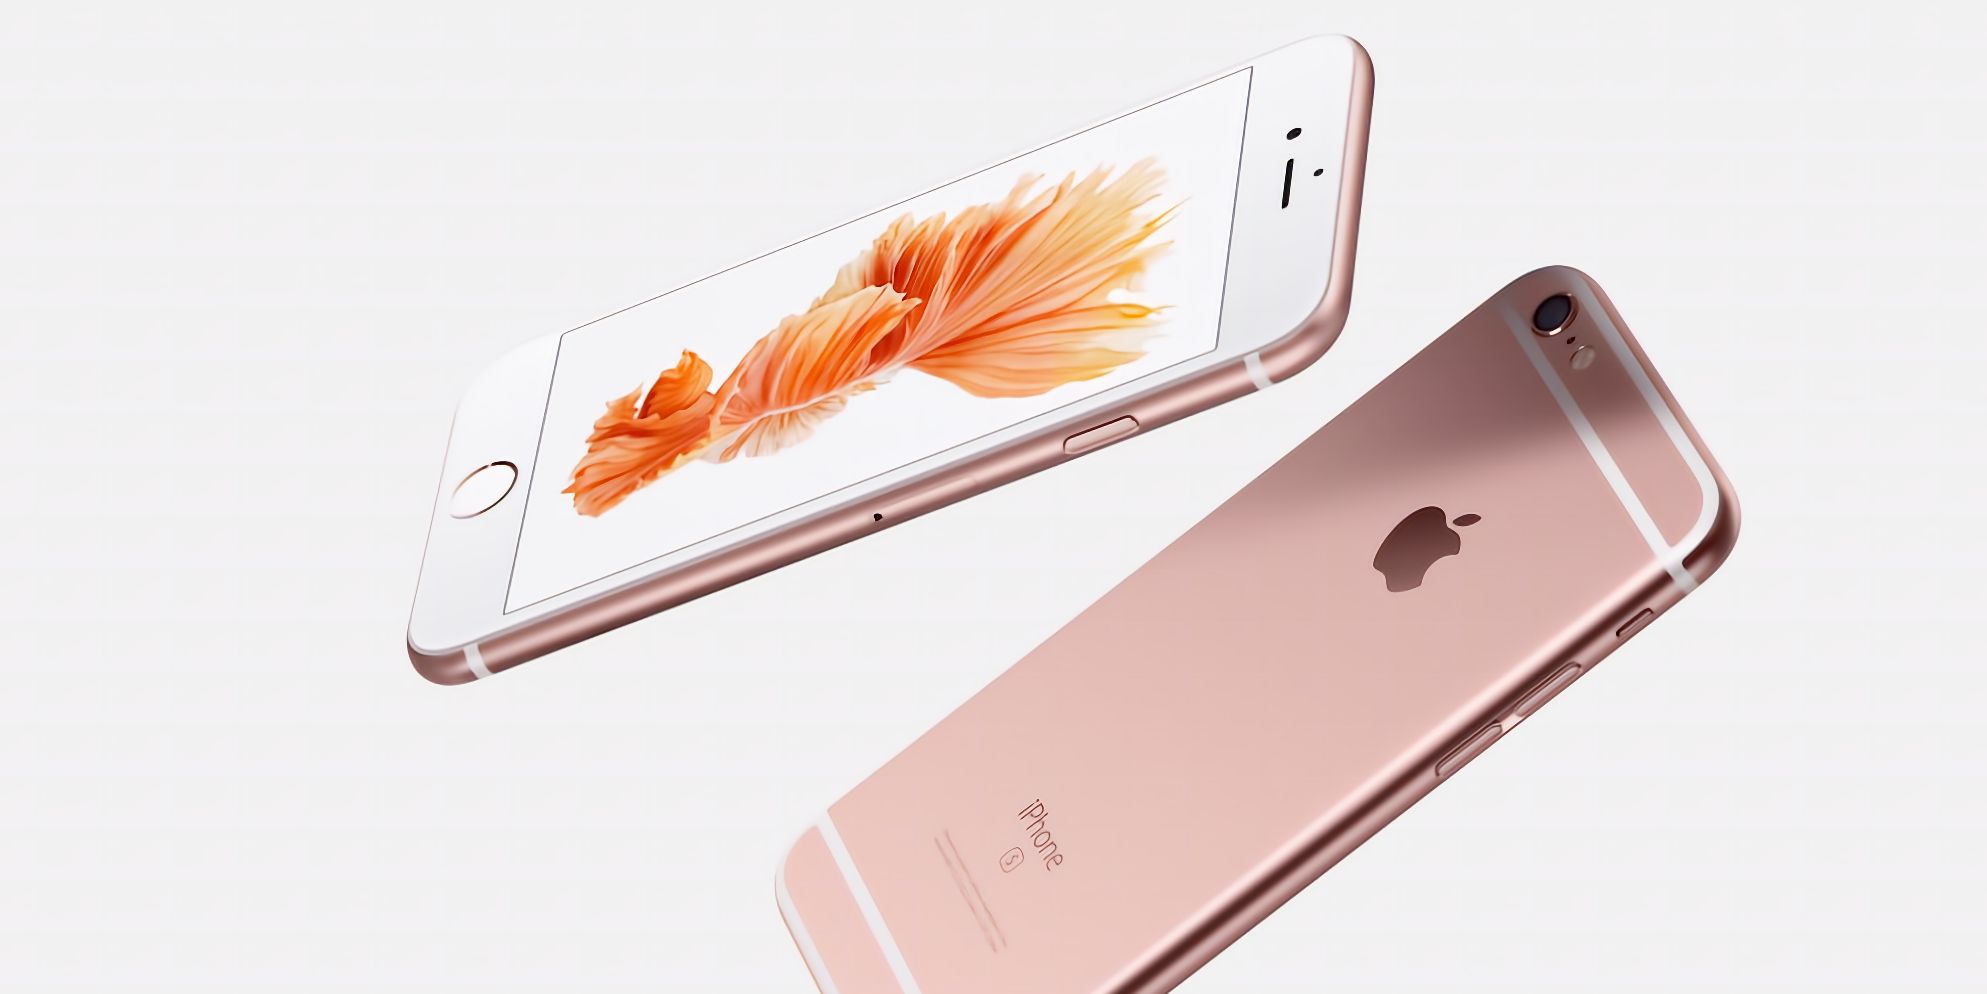 Official render of the iPhone 6s in rose gold